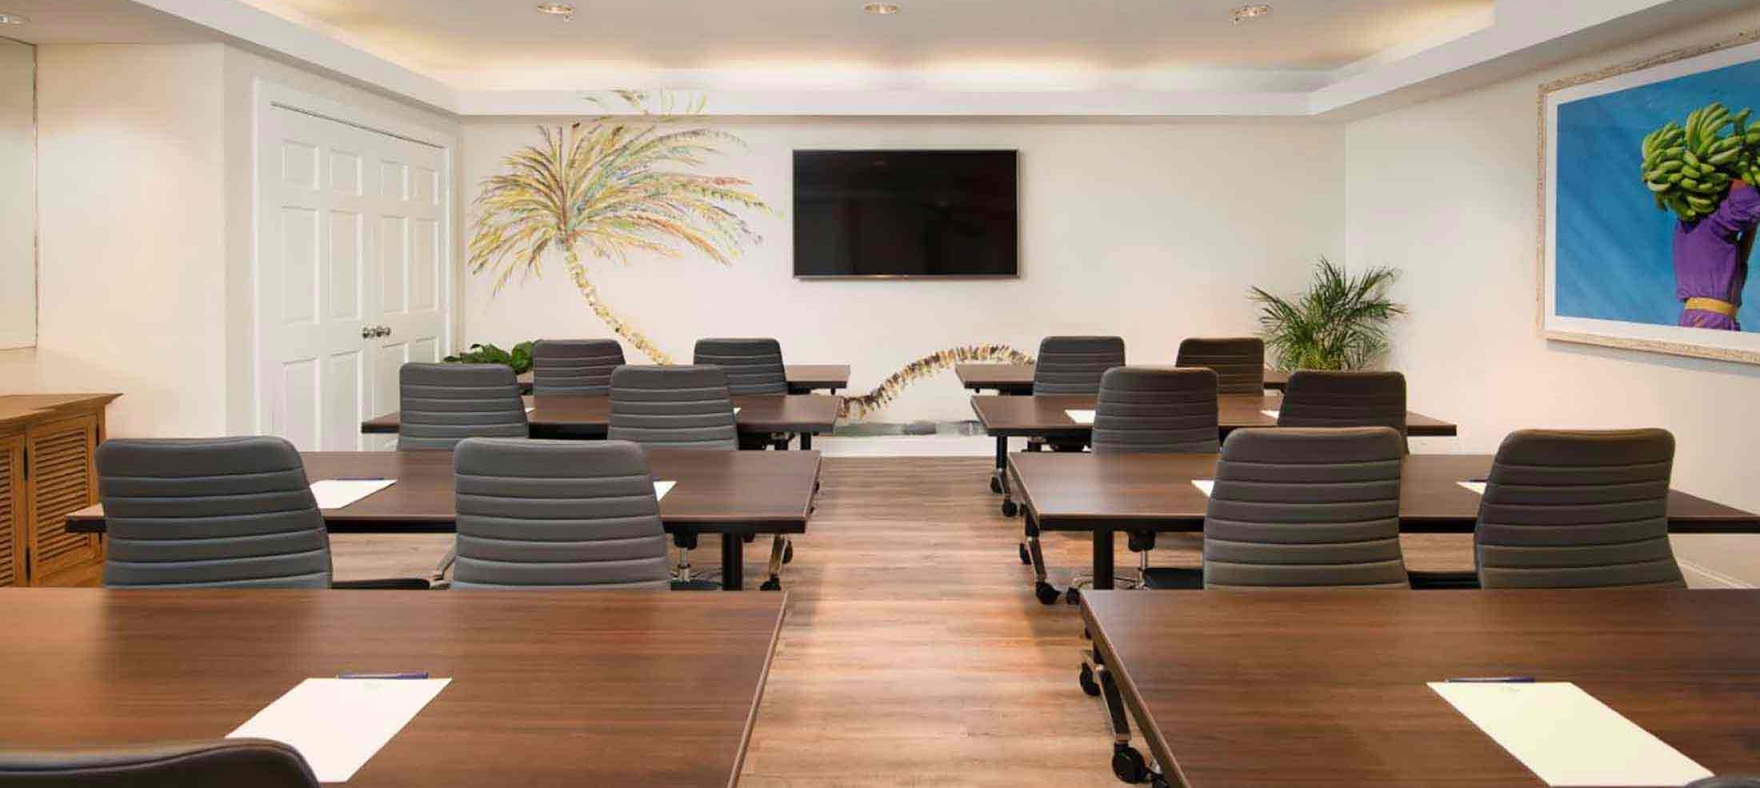 A meeting room with tables set into two rows facing the television on the wall